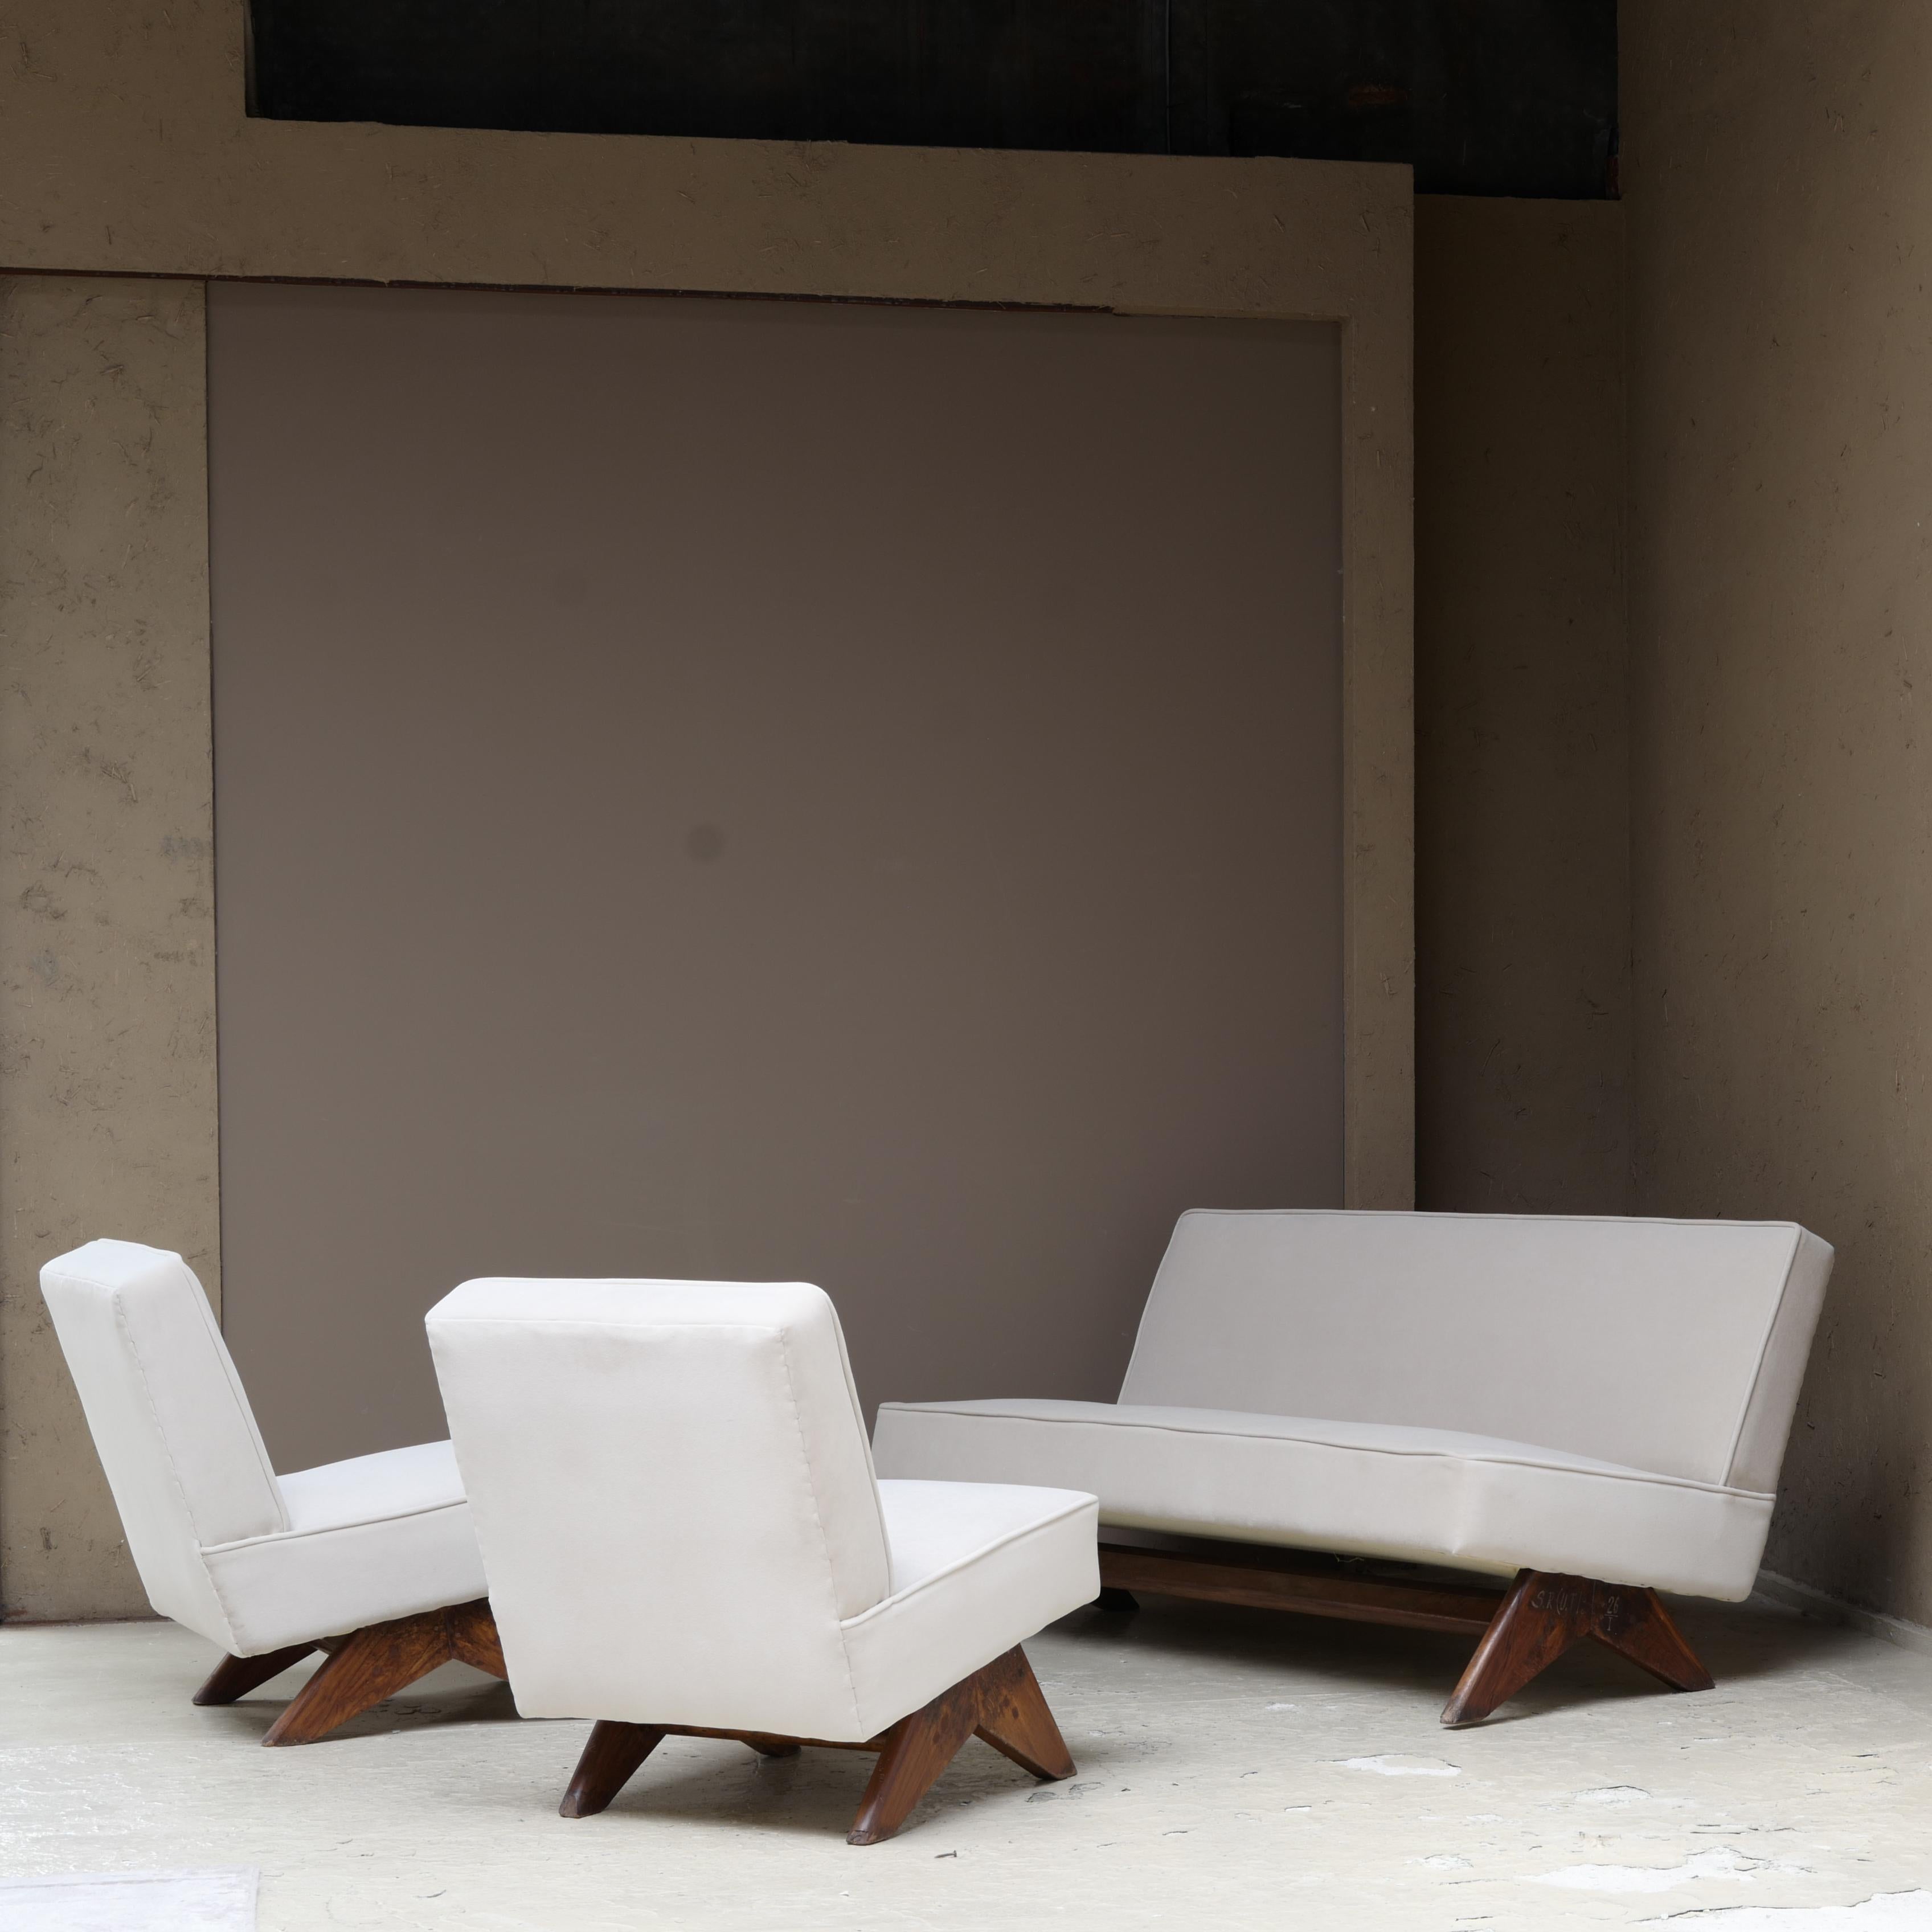 PH362 , PH361 for Chandigarh,India. designed by Pierre Jeanneret.
Since it was actually used, there are some scratches, but it is generally in good condition.
Already reupholstered with new fabric.
I can sent more detail picture.please contact